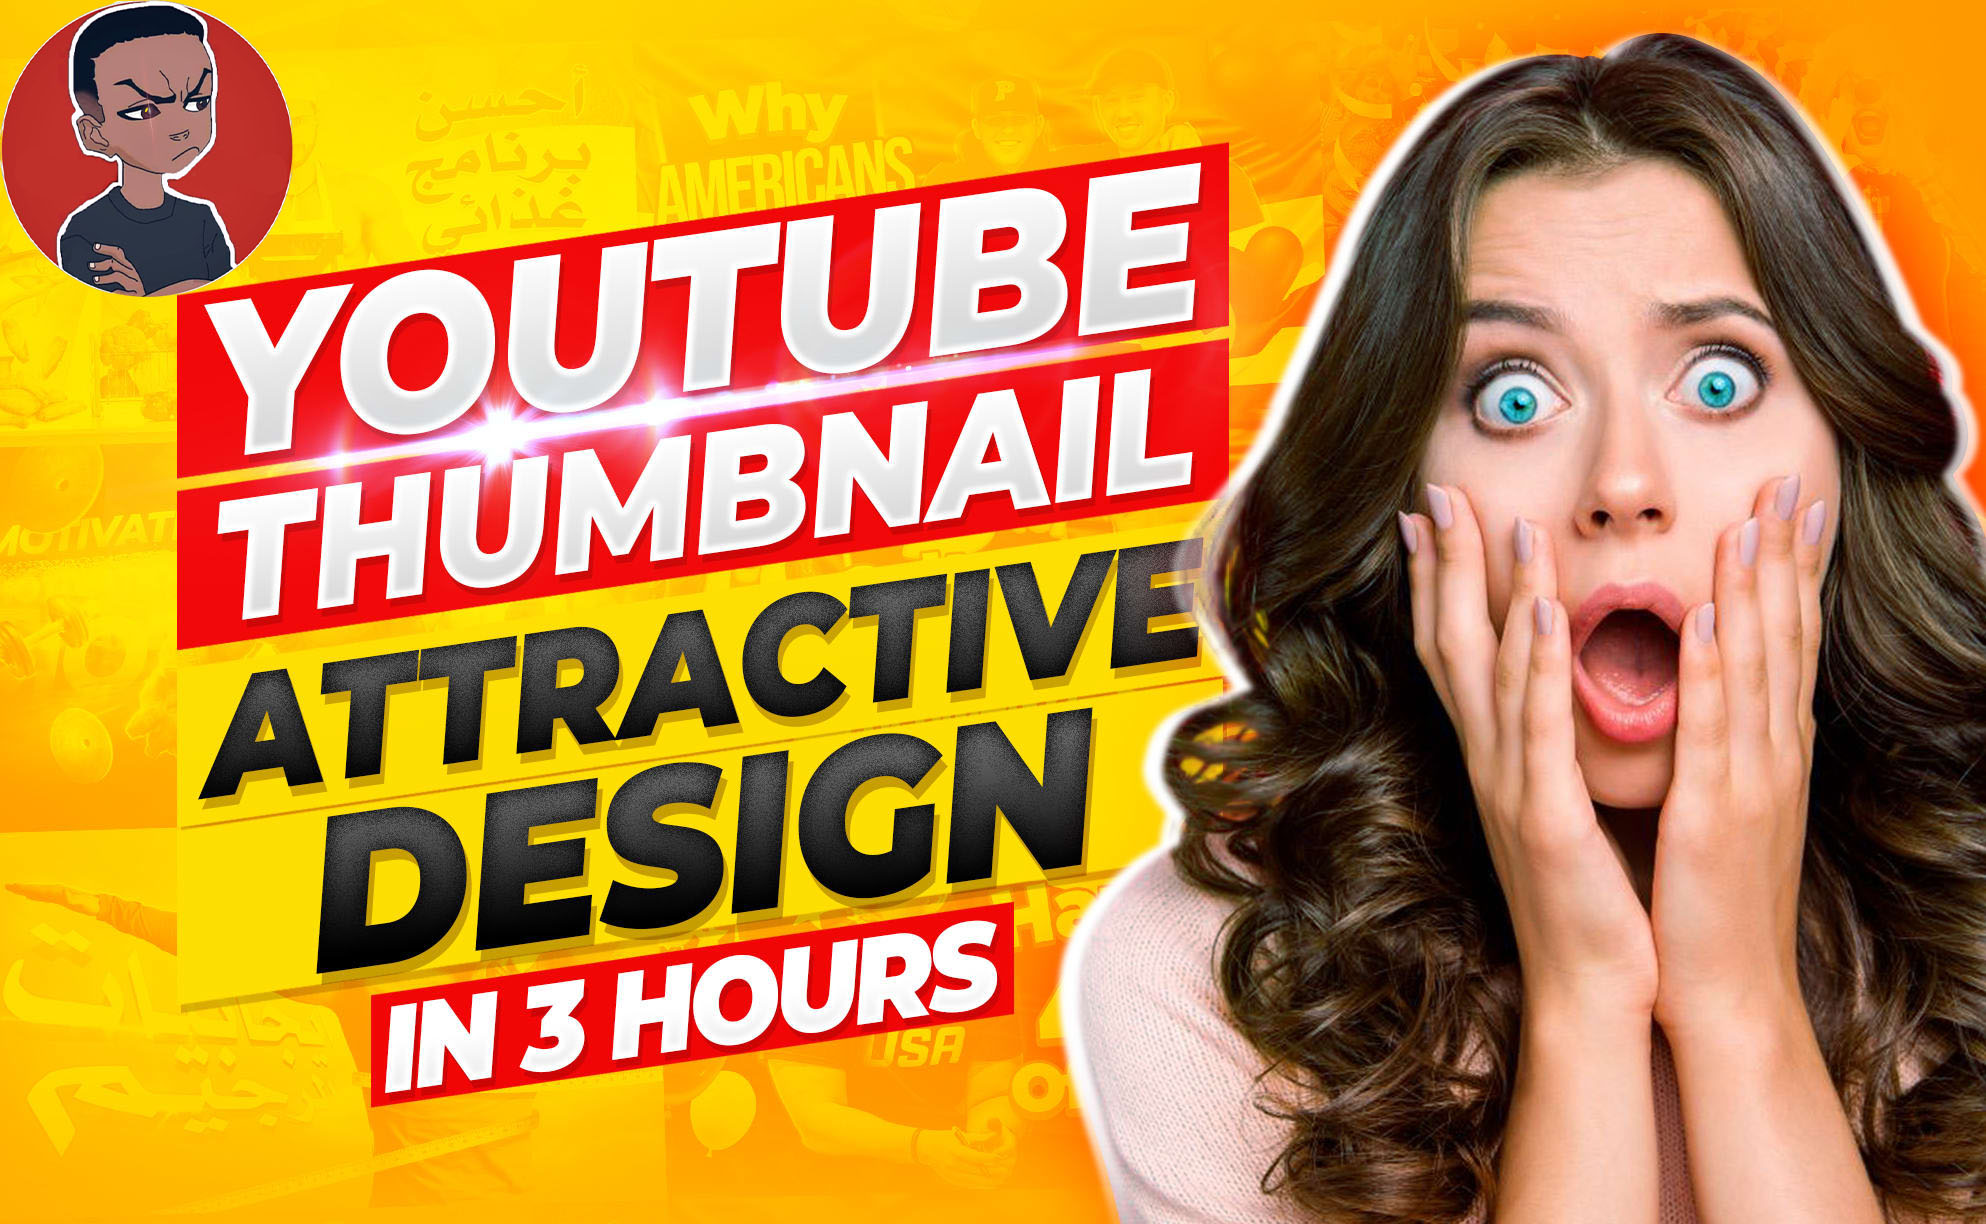 I'll Design an Amazing Youtube Thumbnail in Less Than 3Hours for $5